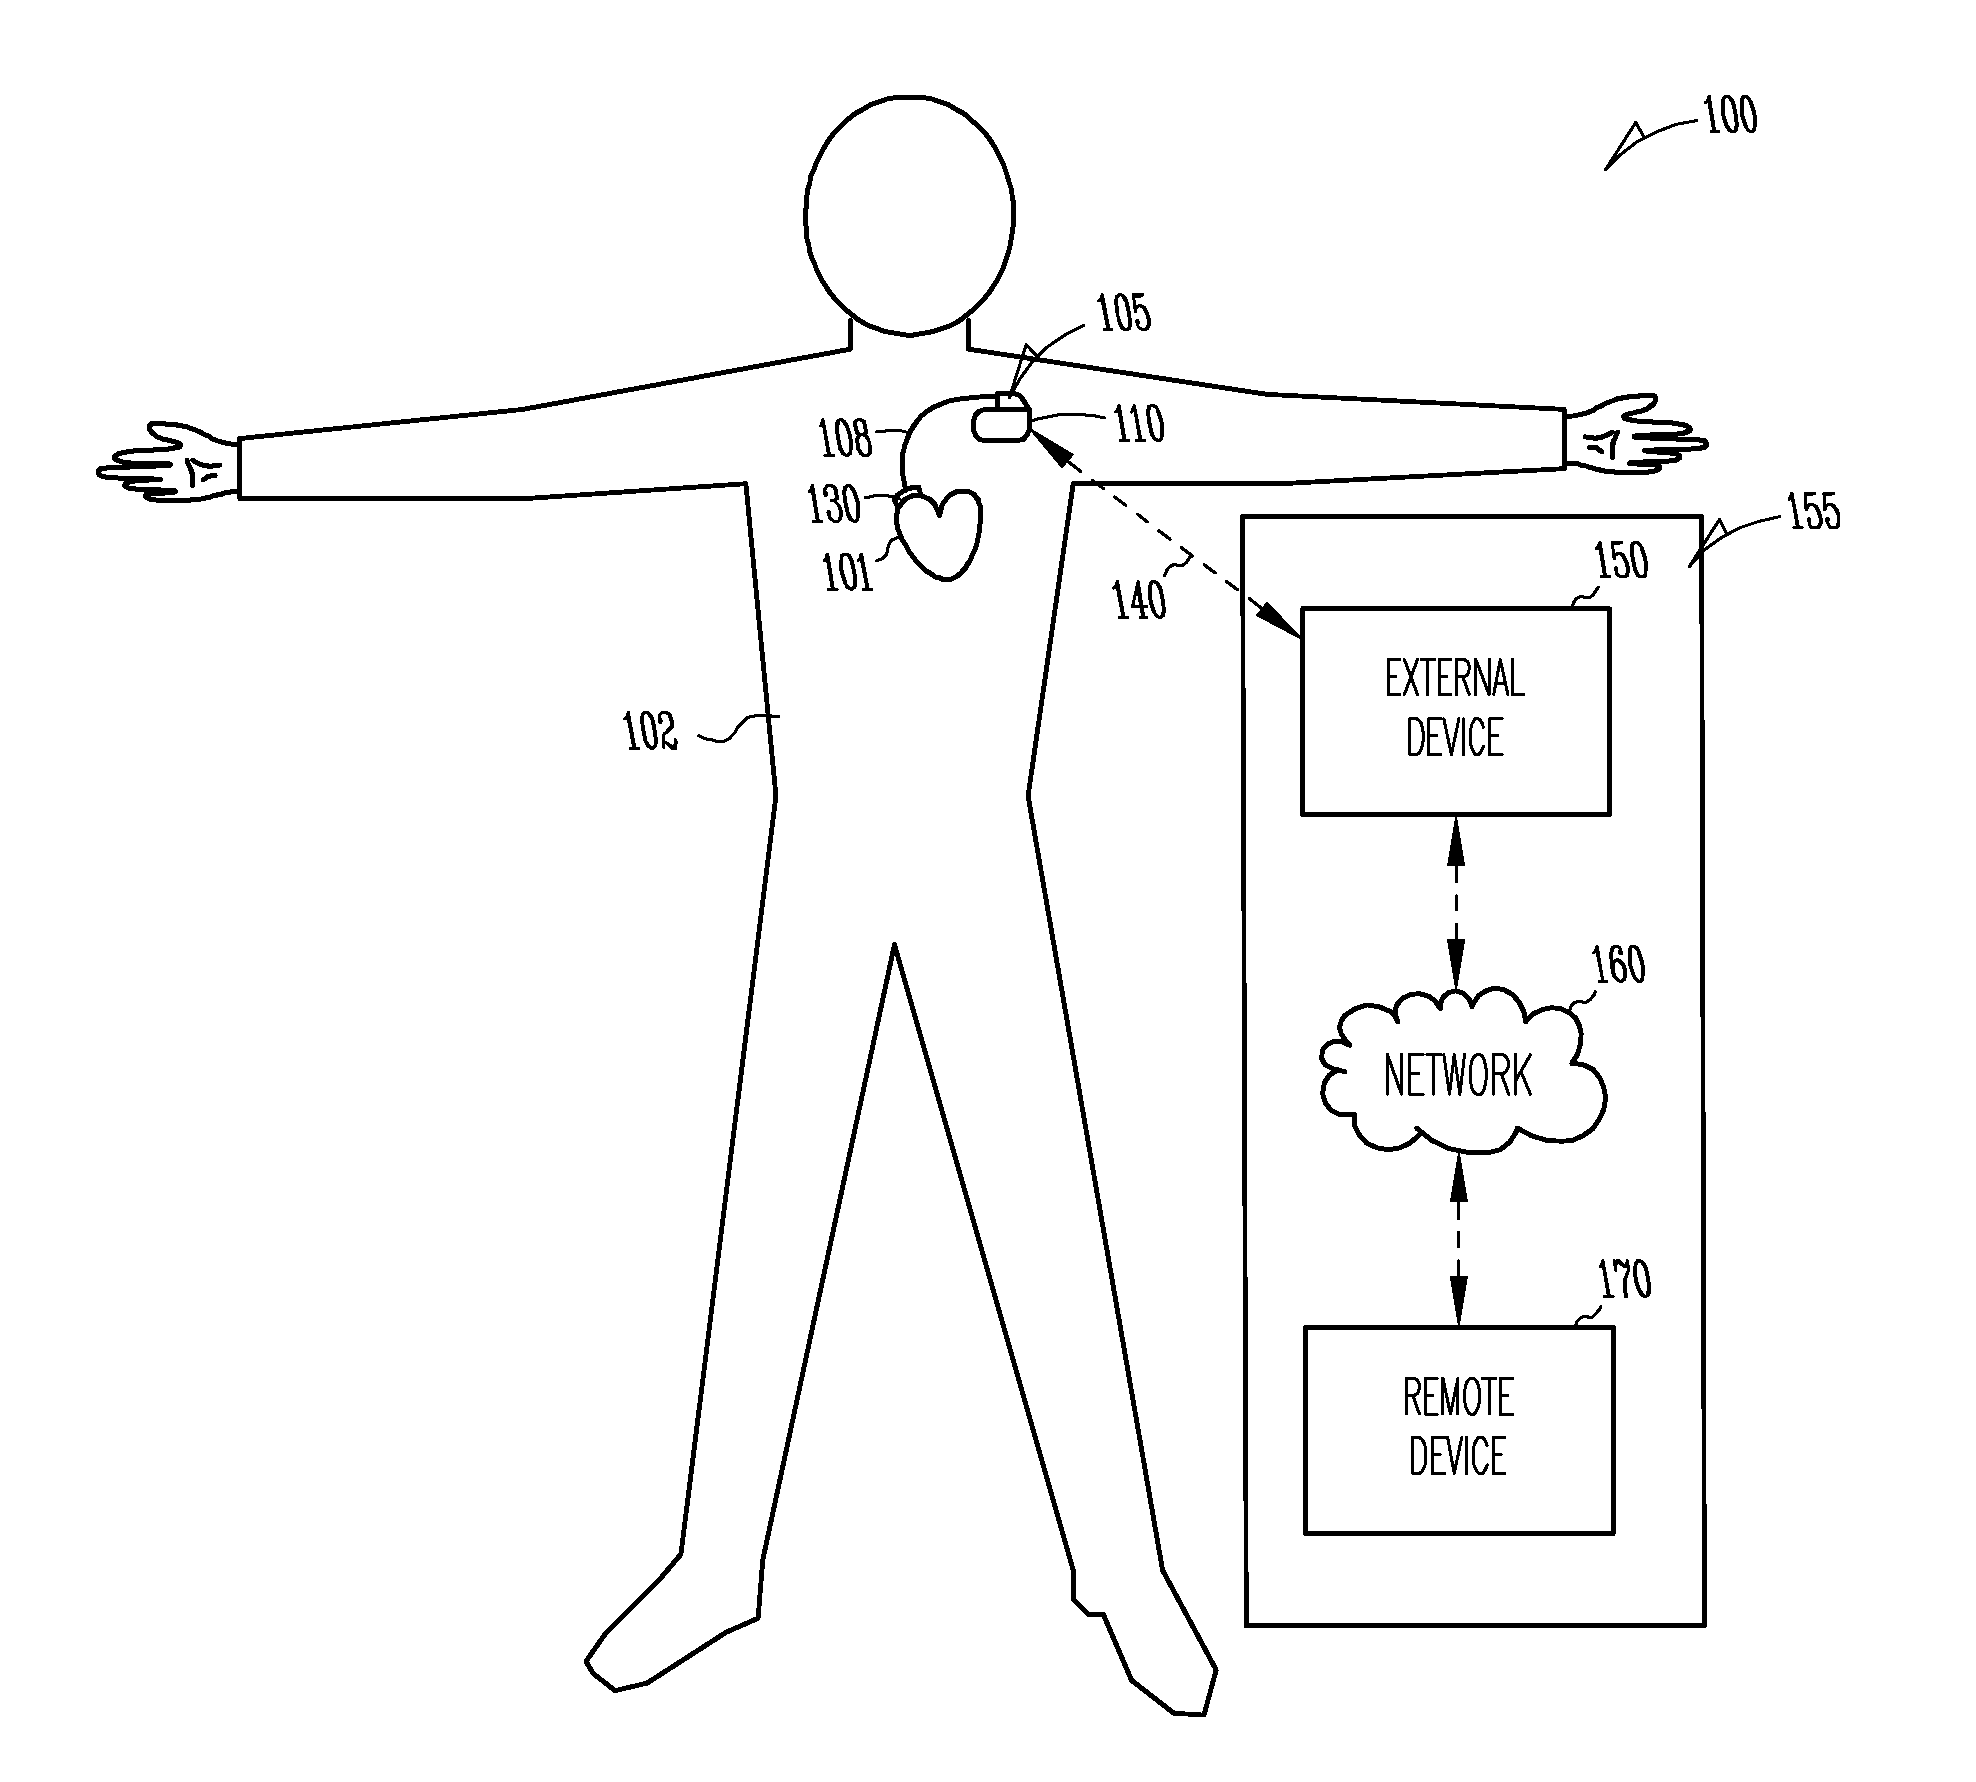 Method for preparing an implantable controlled gene or protein delivery device